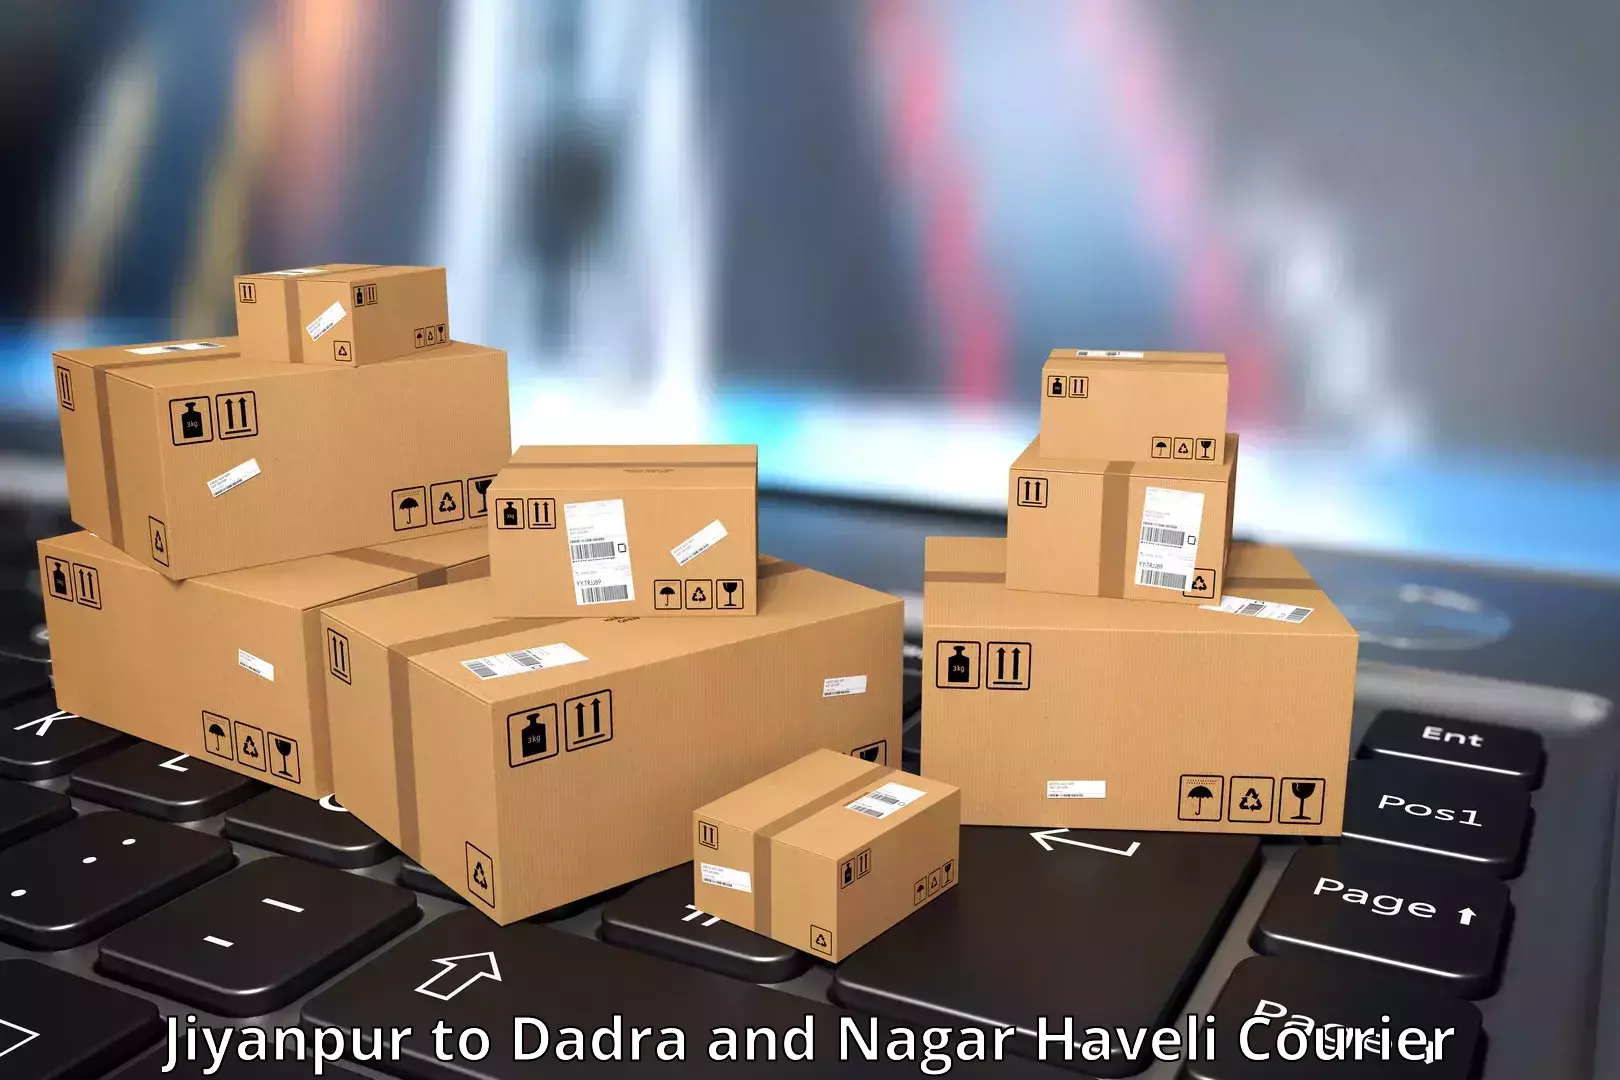 Full-service courier options Jiyanpur to Silvassa